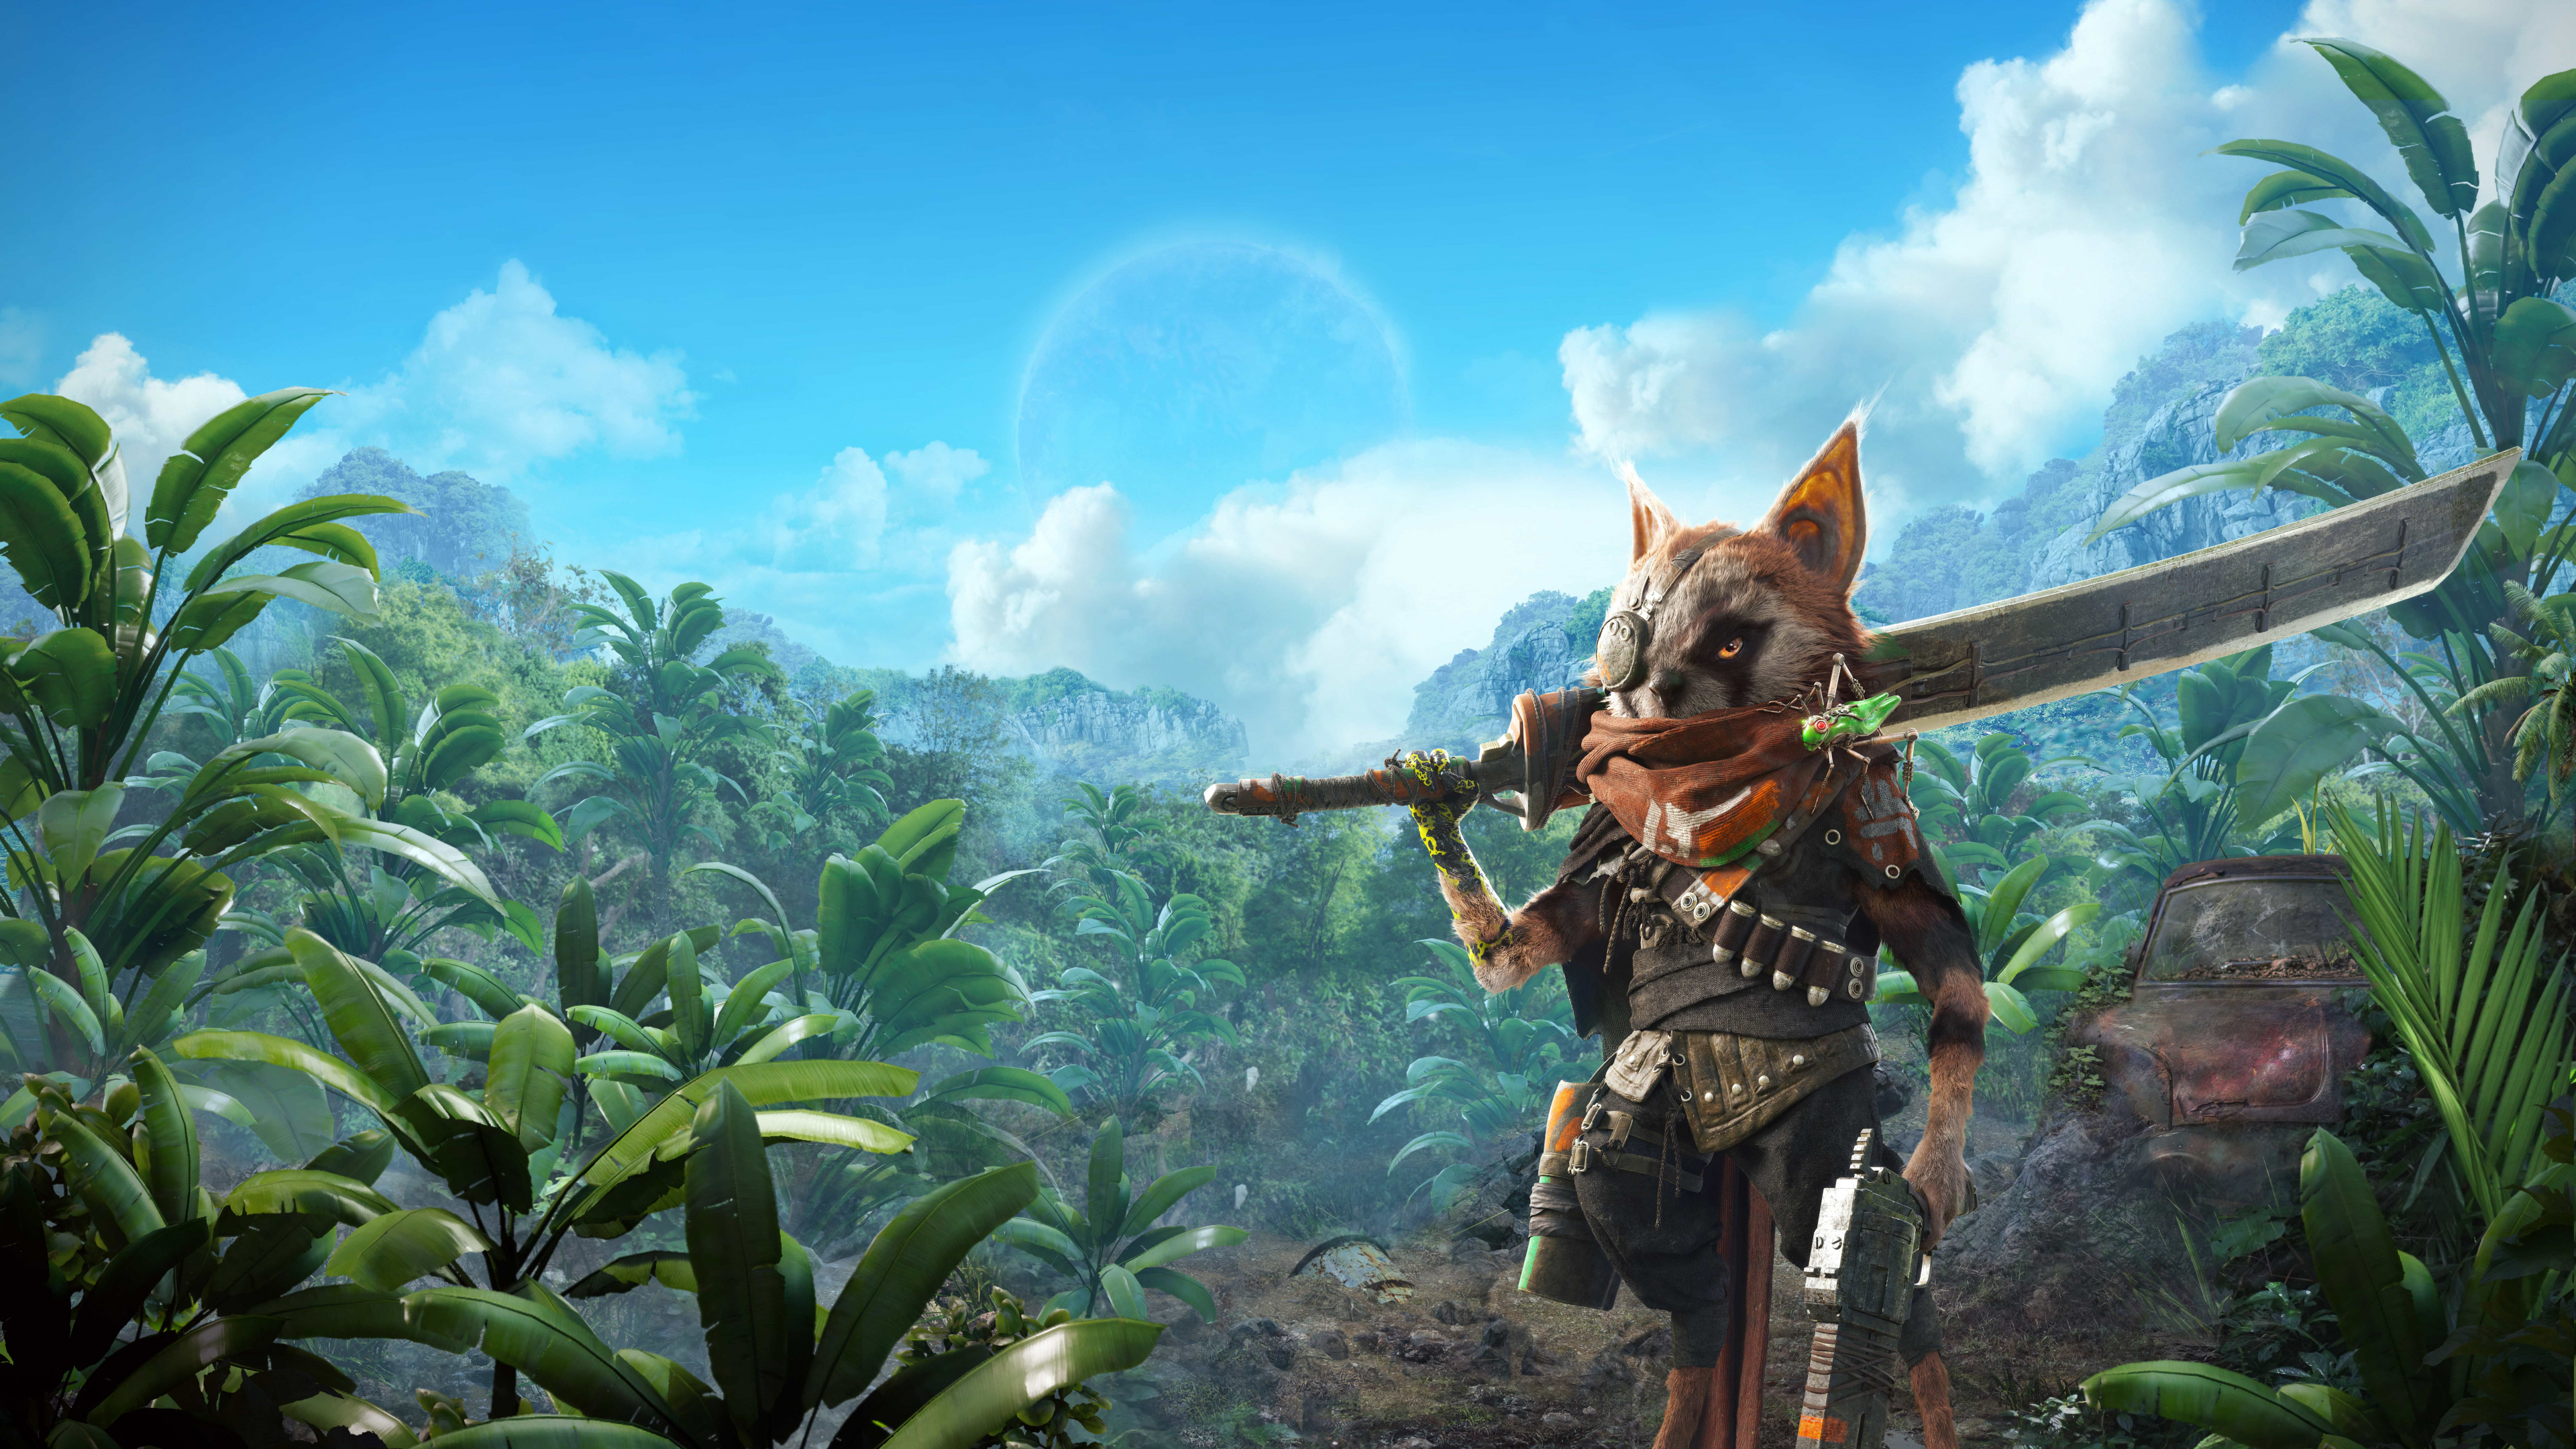 Biomutant, Xbox One, pc Game, Adventure Game, Jungle. Wallpaper in 3840x2160 Resolution